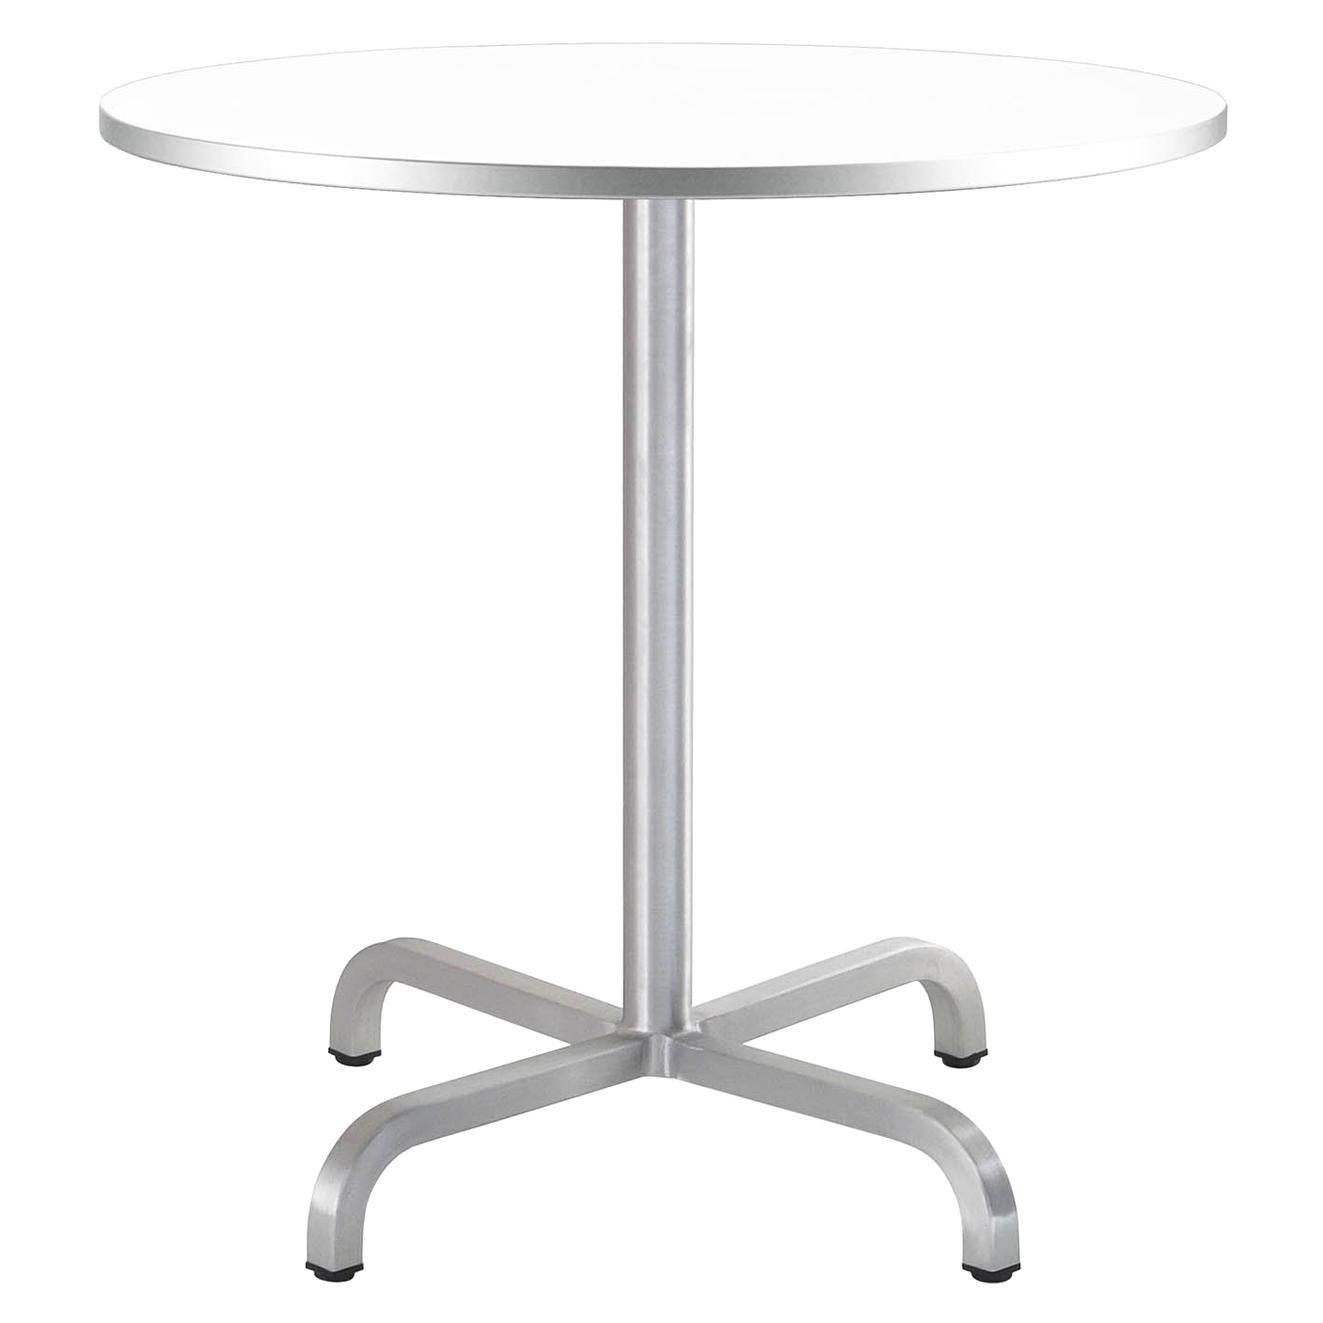 Emeco 20-06 Medium Round Cafe Table with White Laminate Top by Norman Foster 